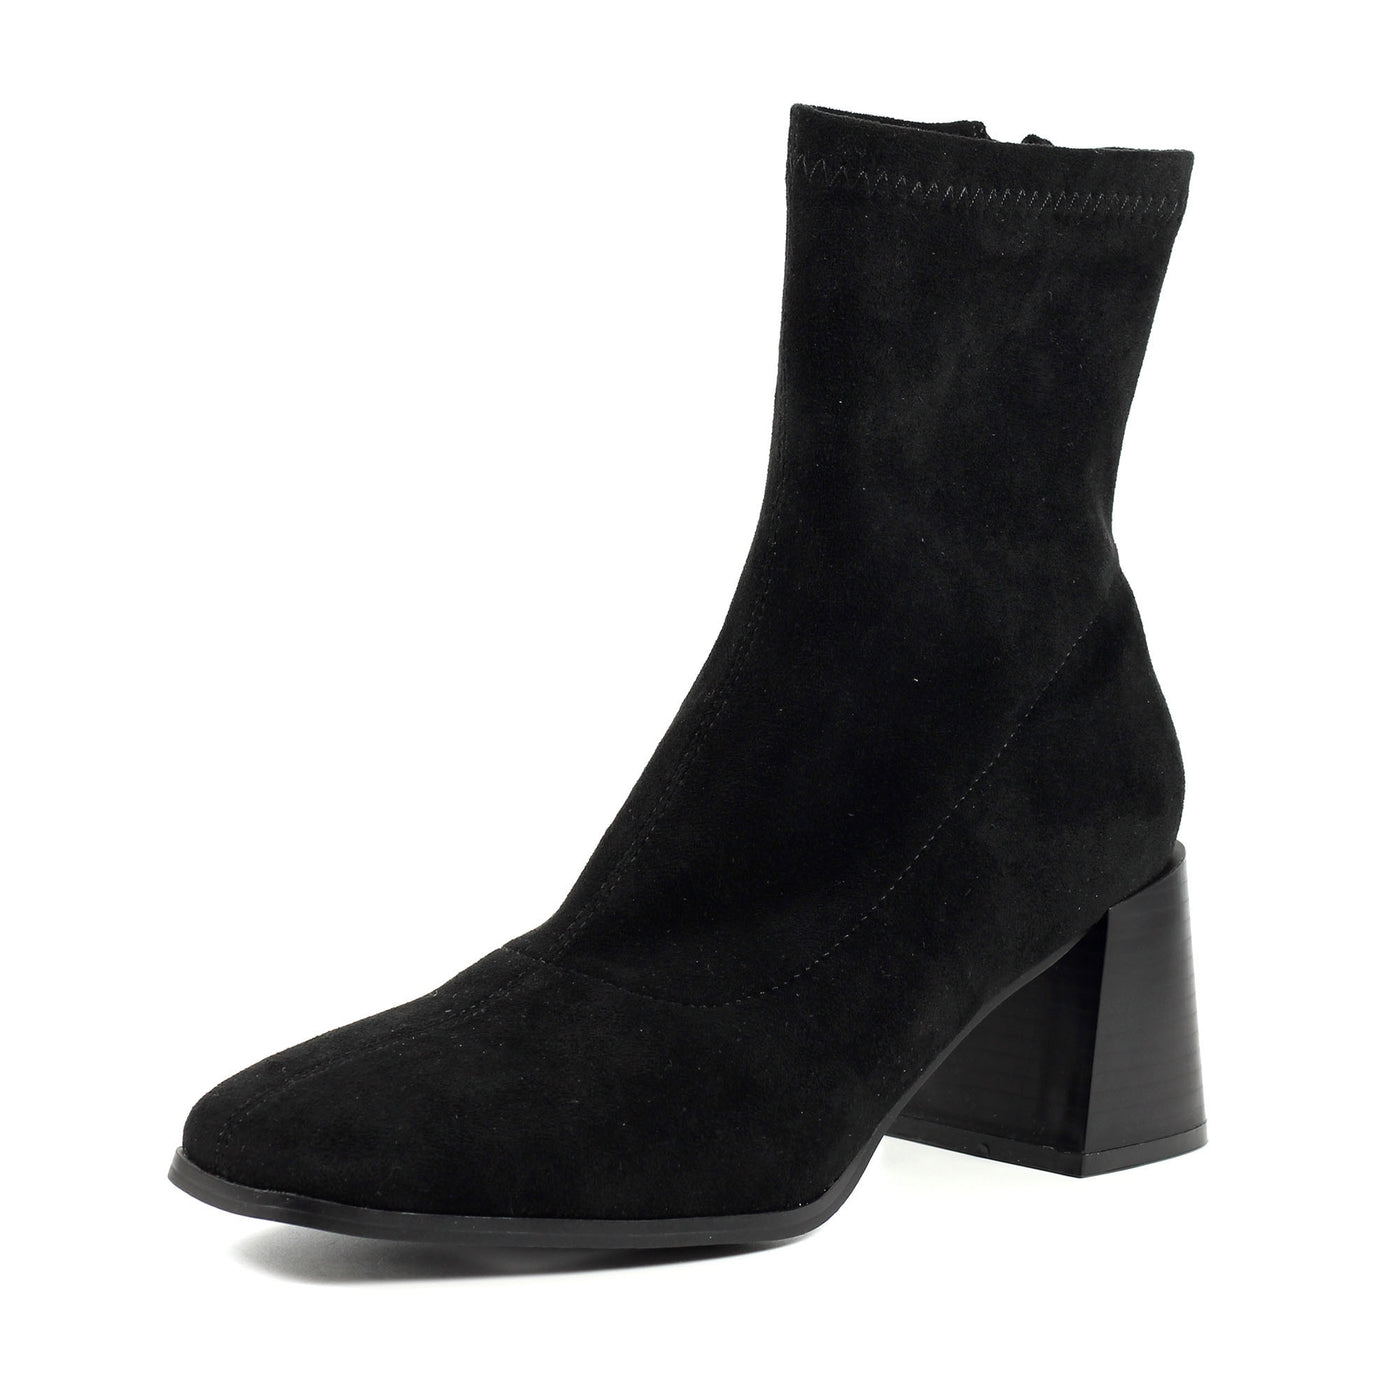 Amethyst Black Suede Block Heel Ankle Boots Discover leather & suede ankle  boots, boots, sandals & trainers at Carl Scarpa.com